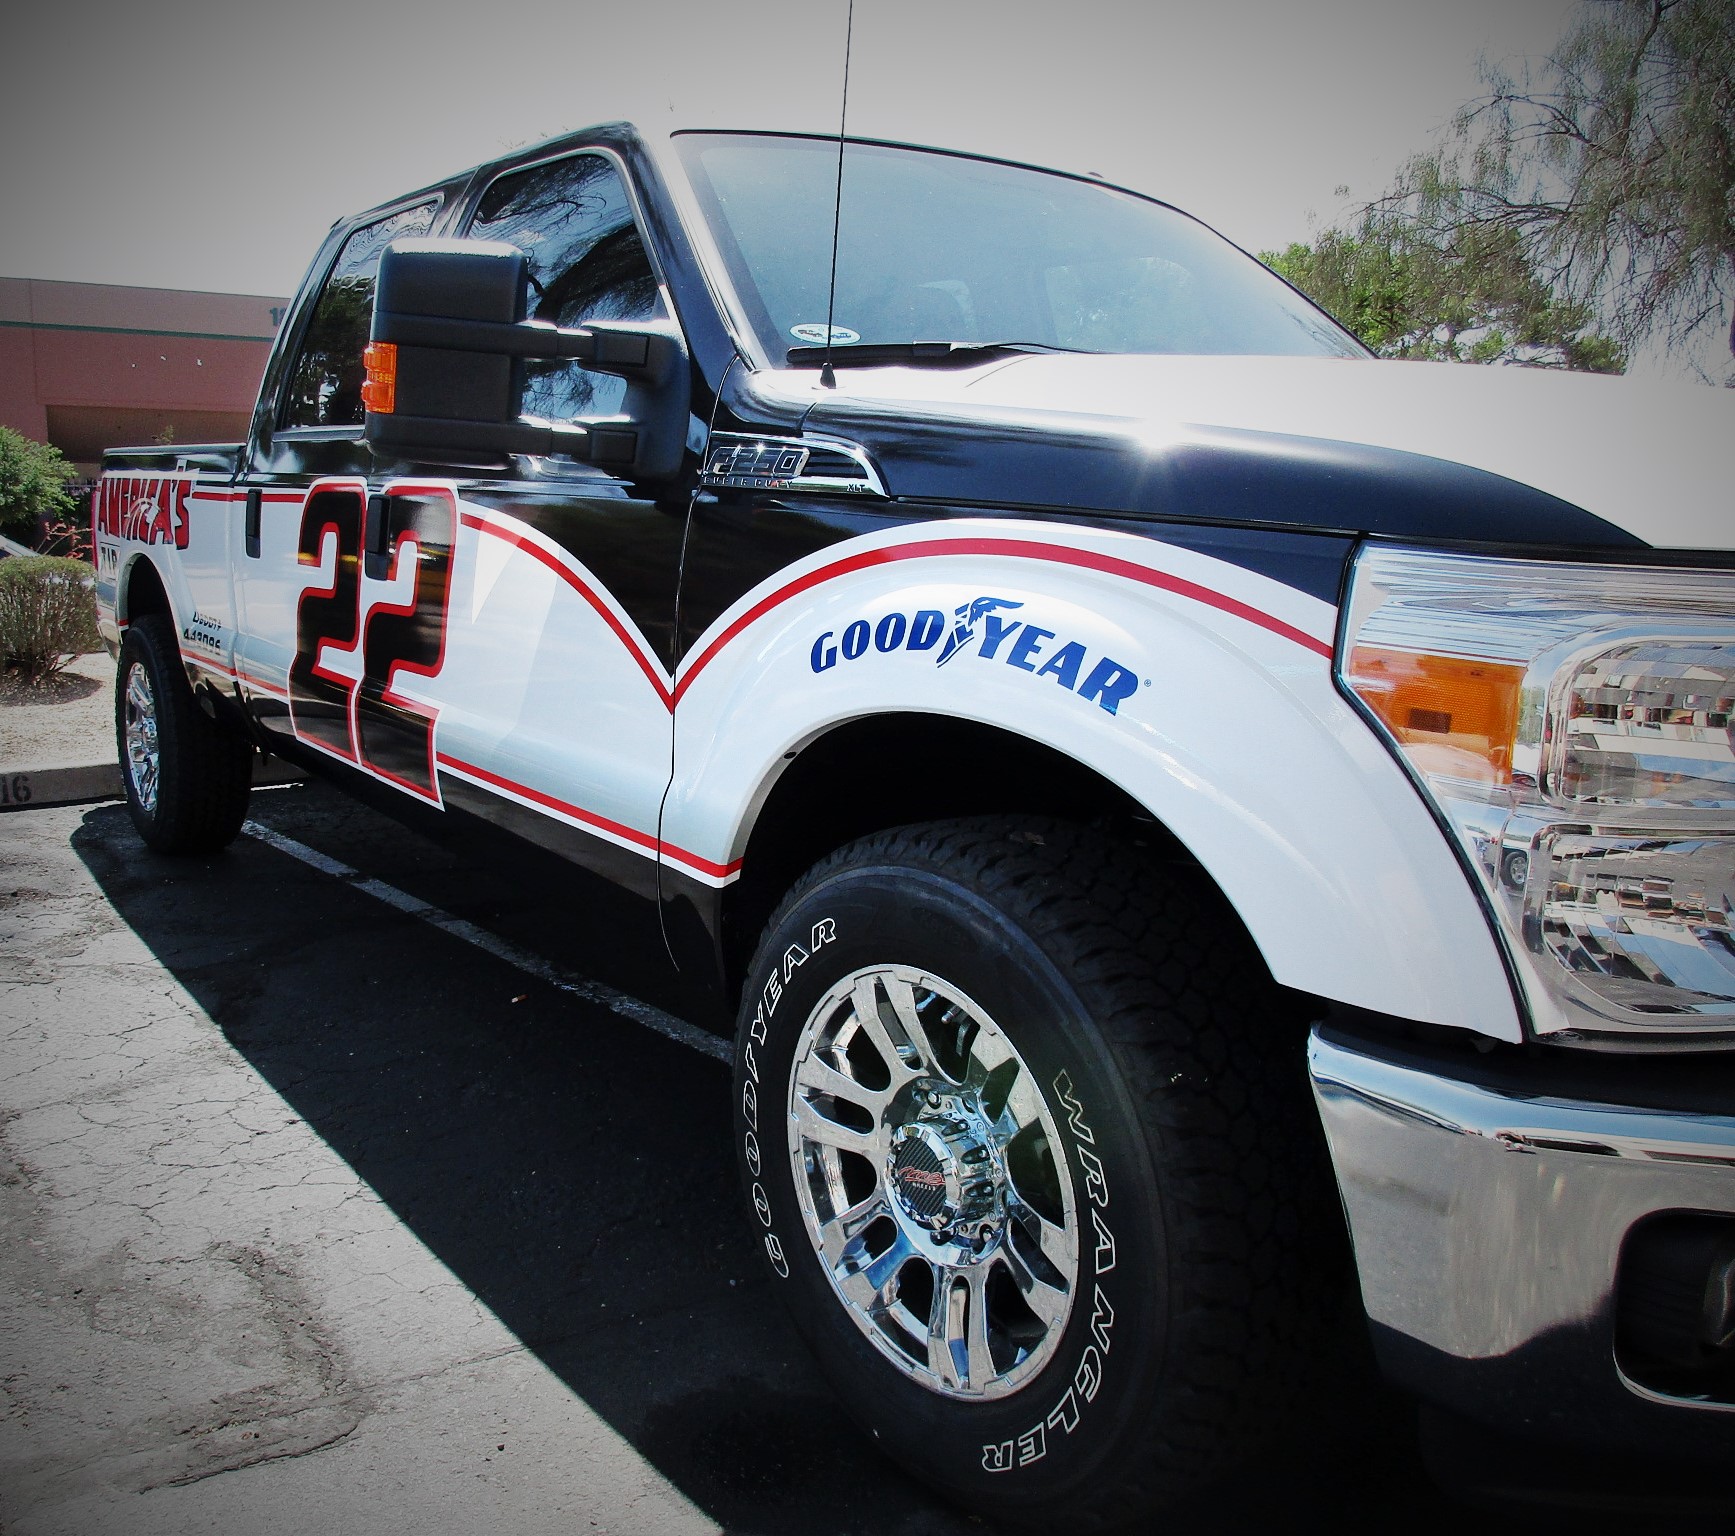 Fast-Trac Designs Vehicle Wraps & Screen Printing | Phone ...